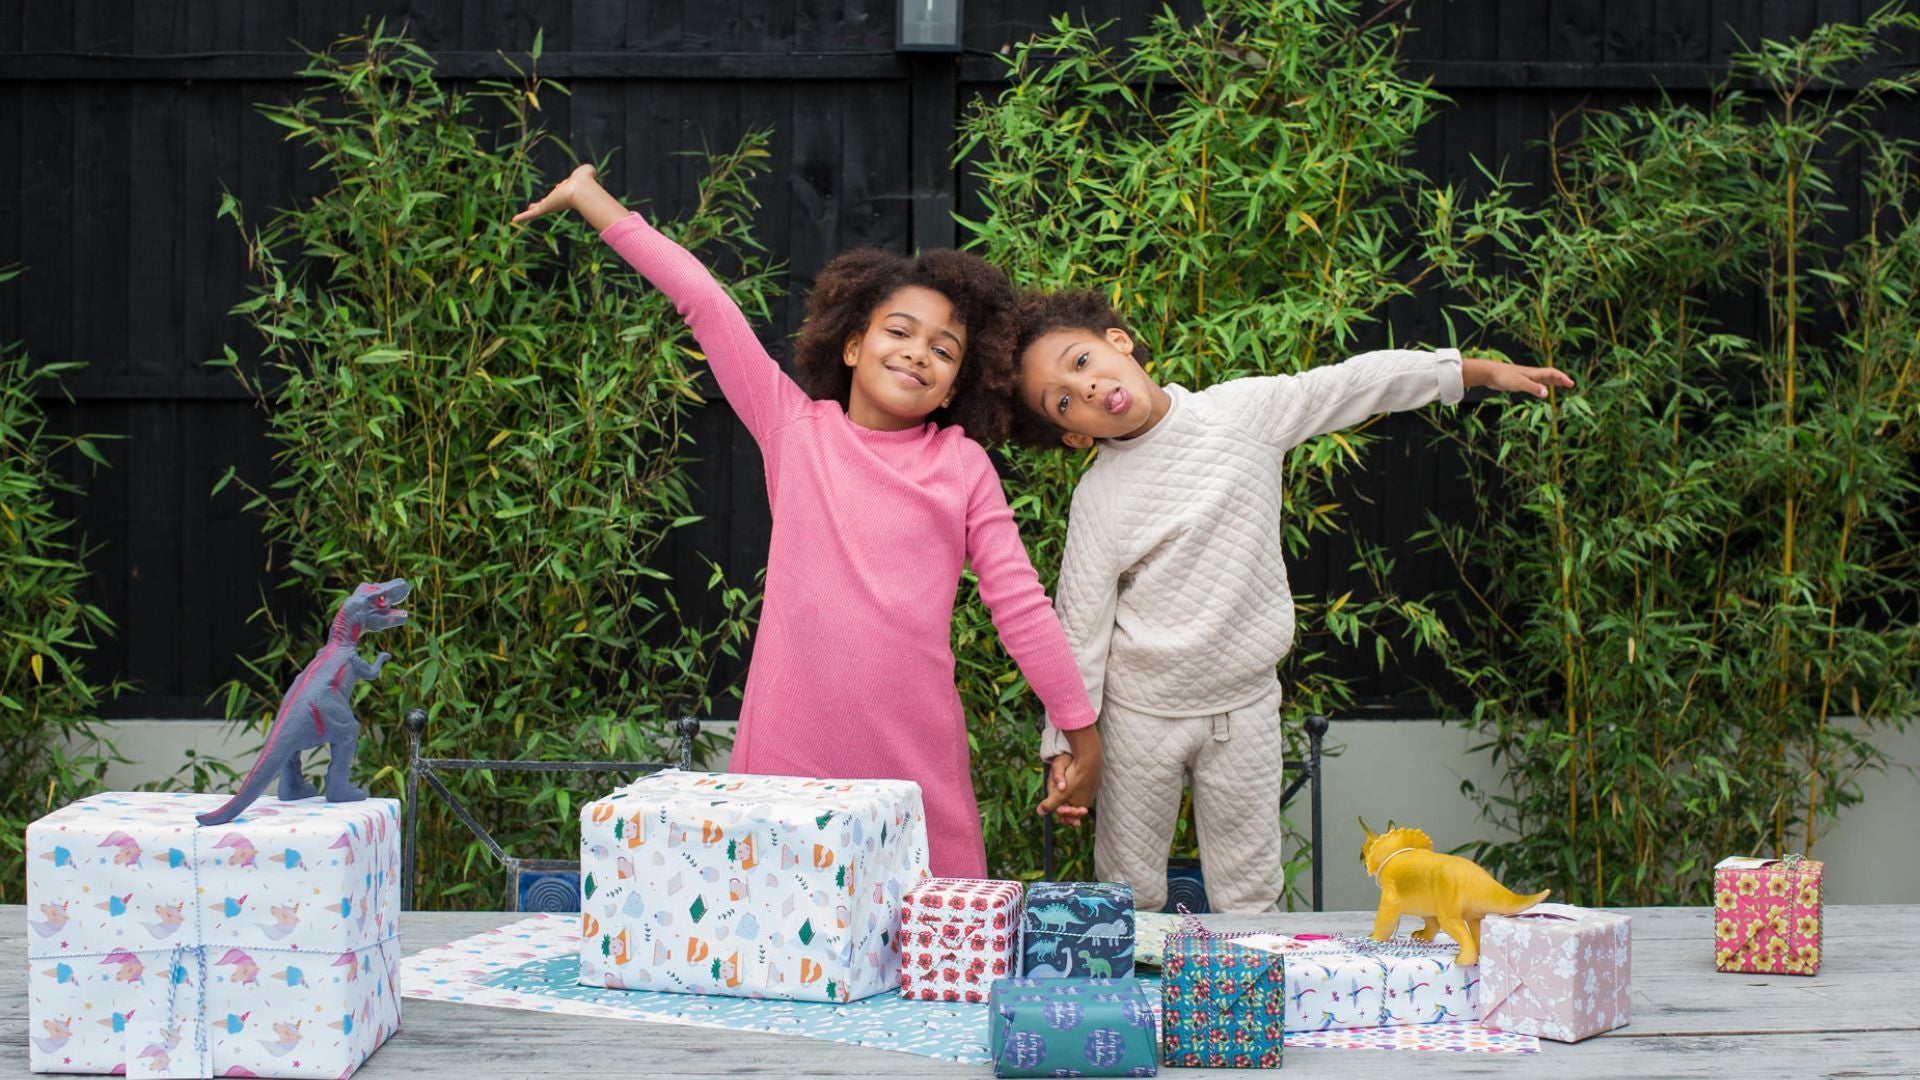 Children standing surrounded by trees and wrapped gifts